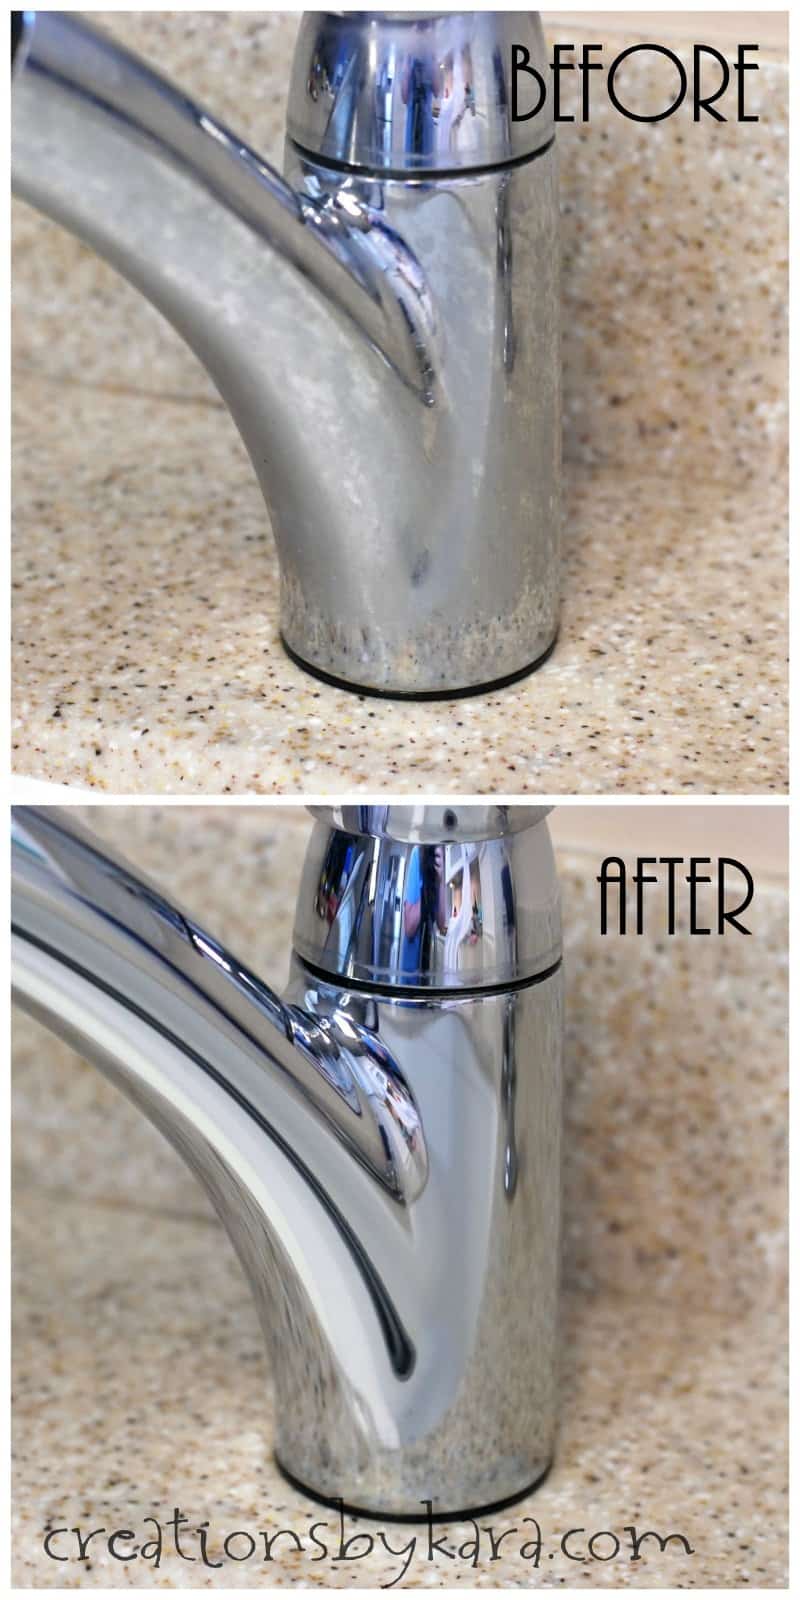 Discoloration on stainless steel faucet - cleaners came through